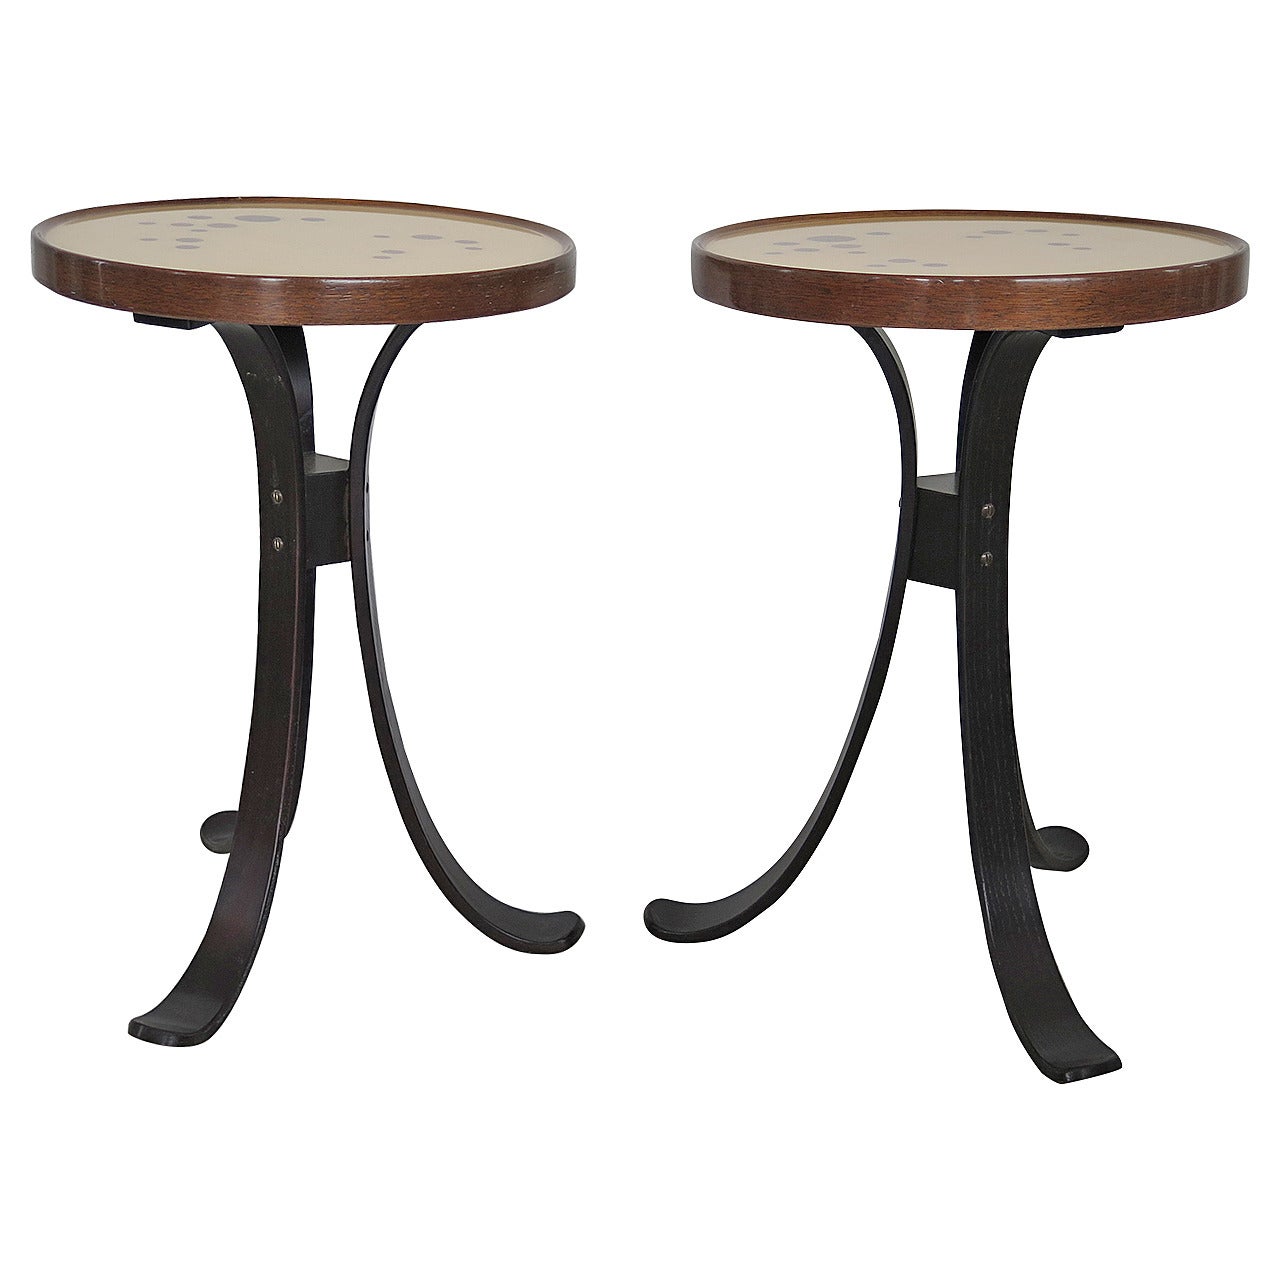 Pair of Edward Wormley for Dunbar Constellation Tables